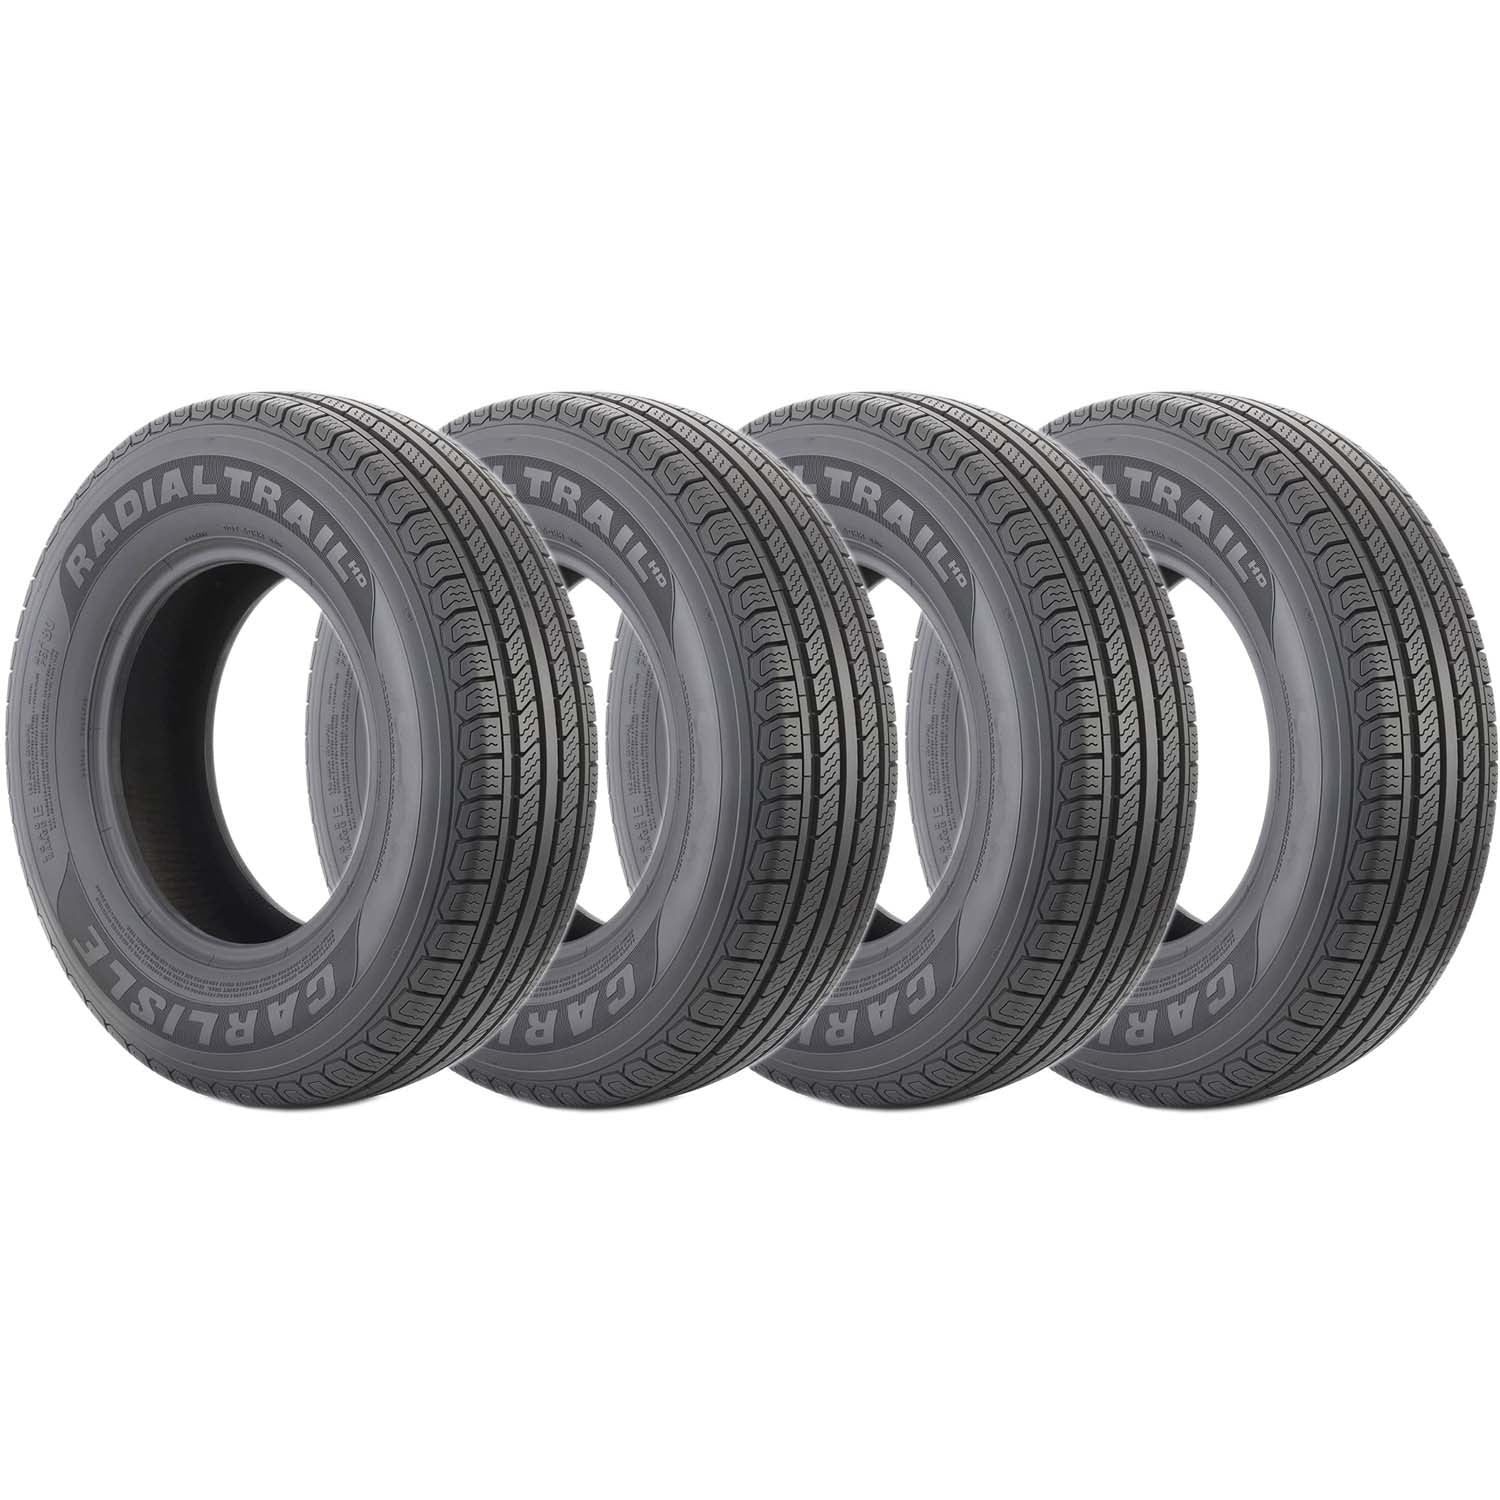 Carlisle Radial Trail HD Trailer Tire LRC 6ply ST185/80R13 Pack of 4